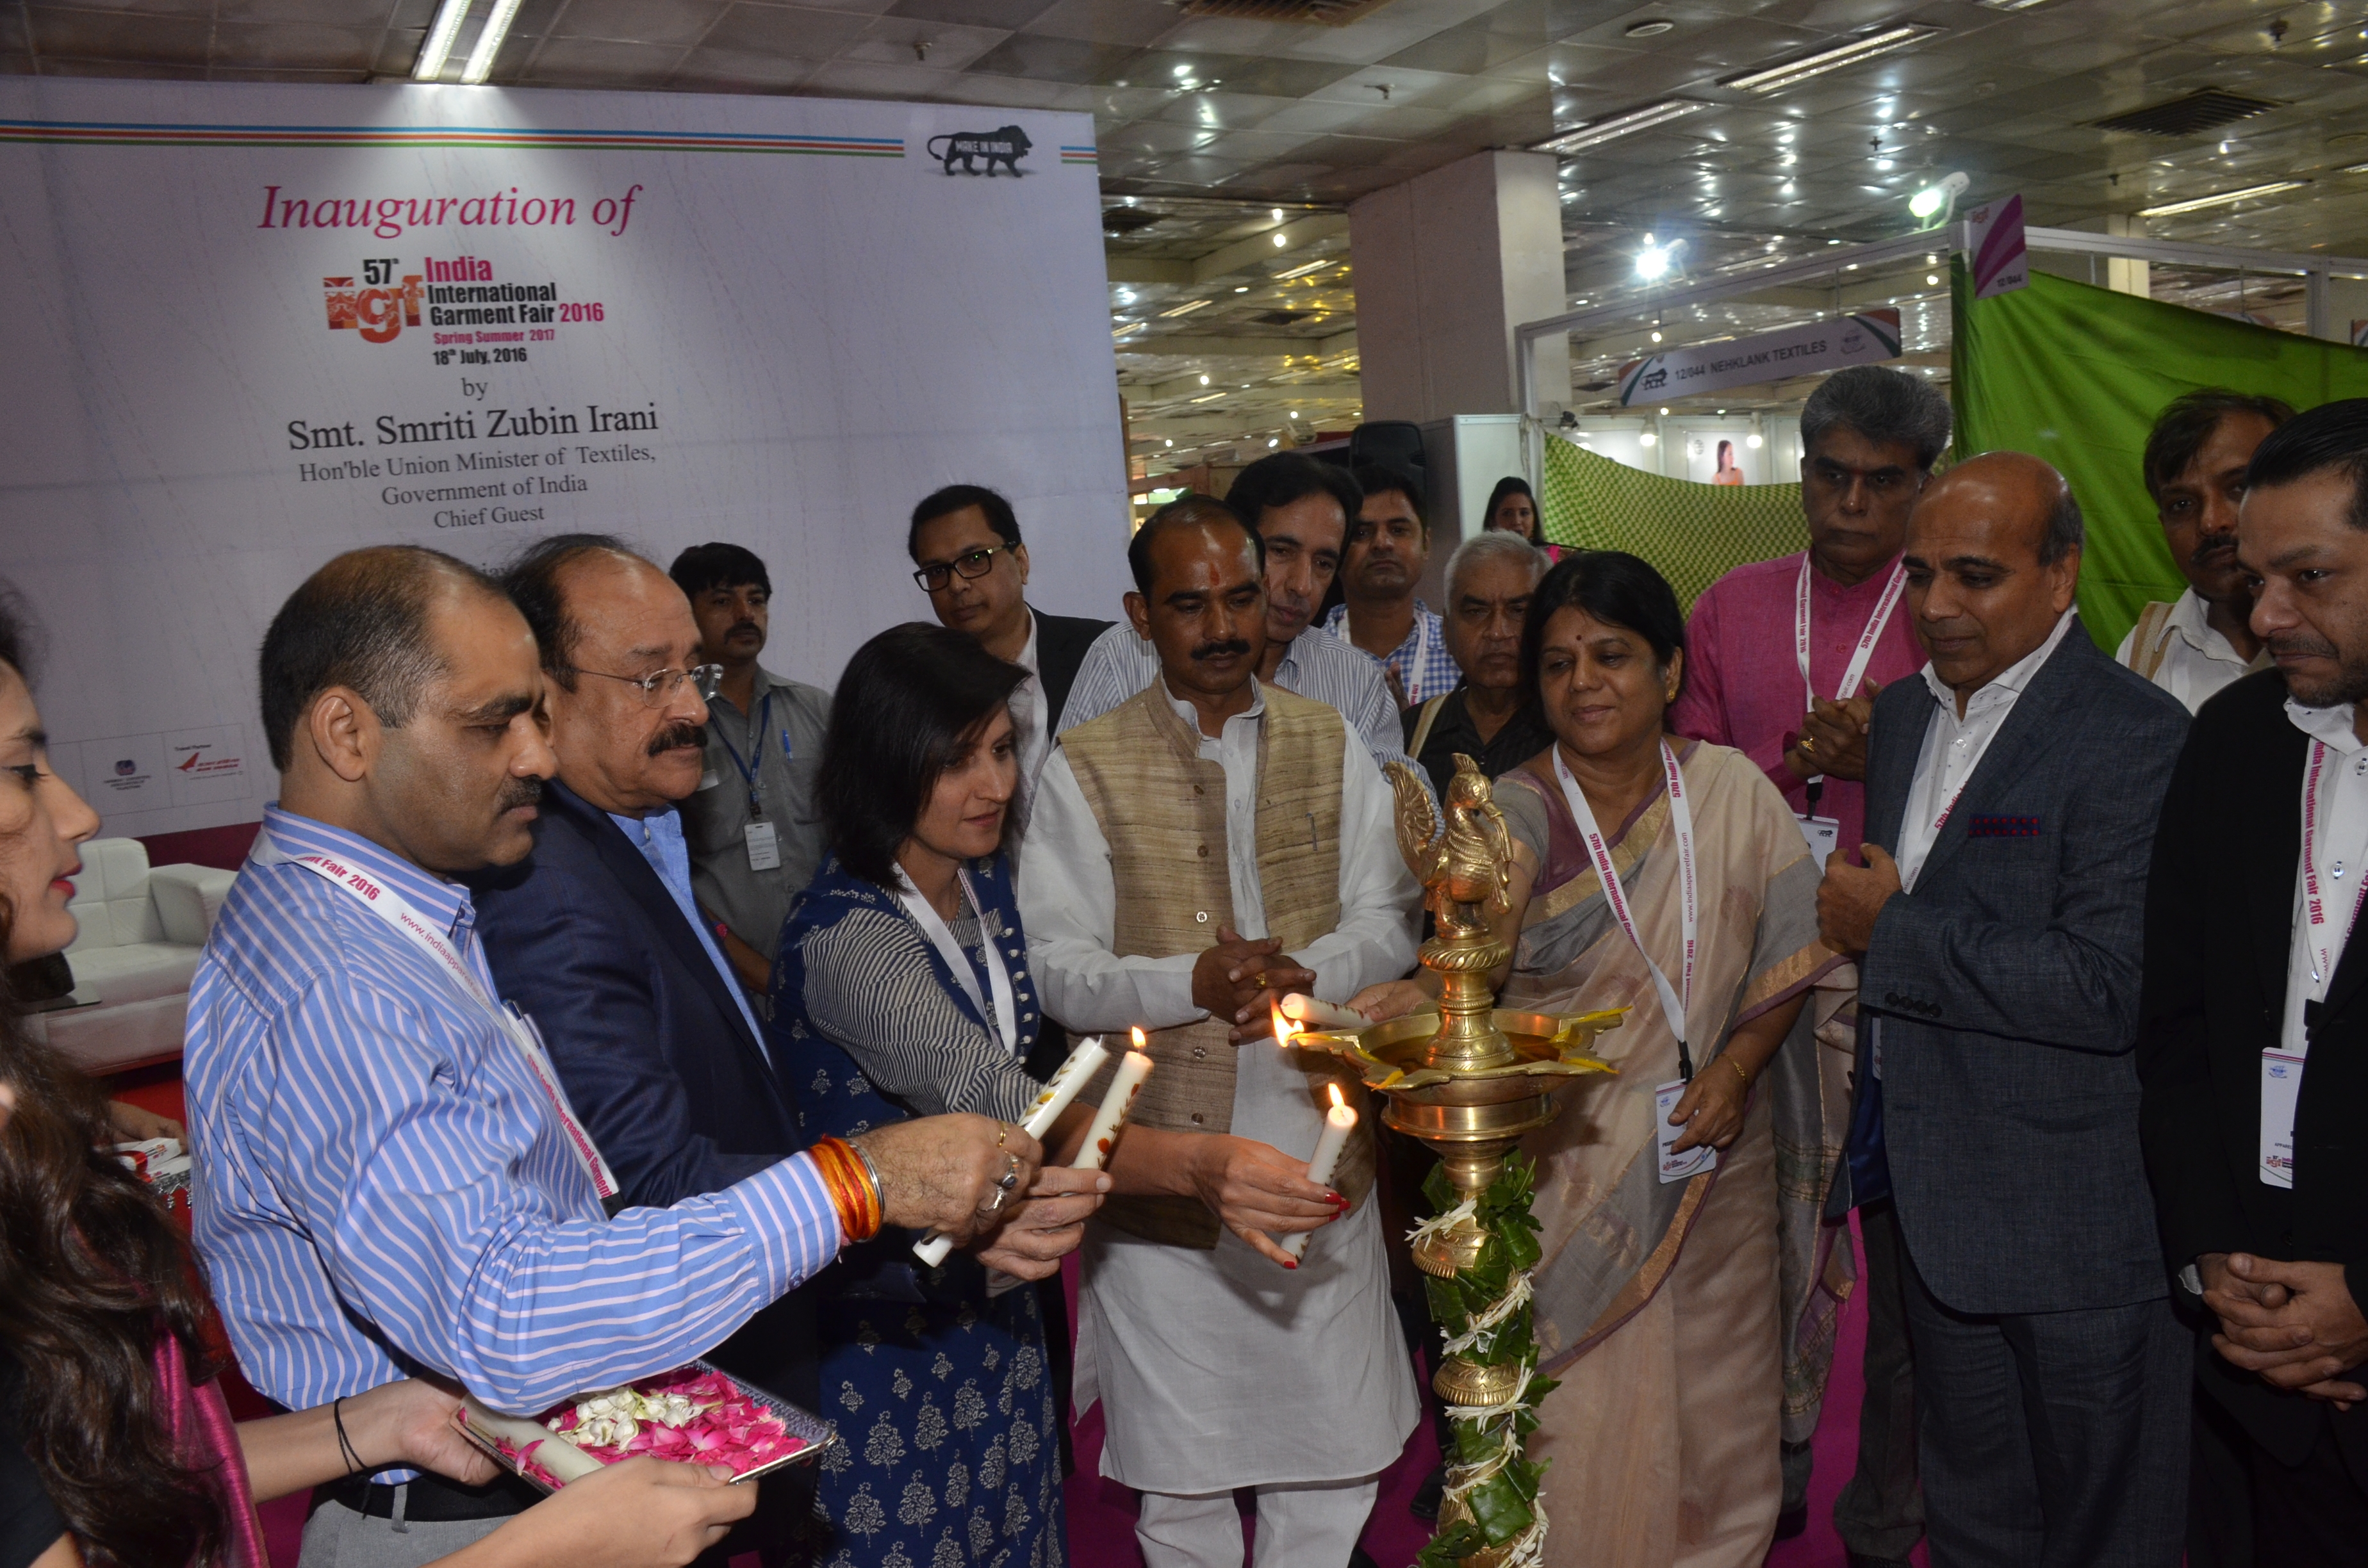 57TH IIGF proved to be a significant trade ground for India